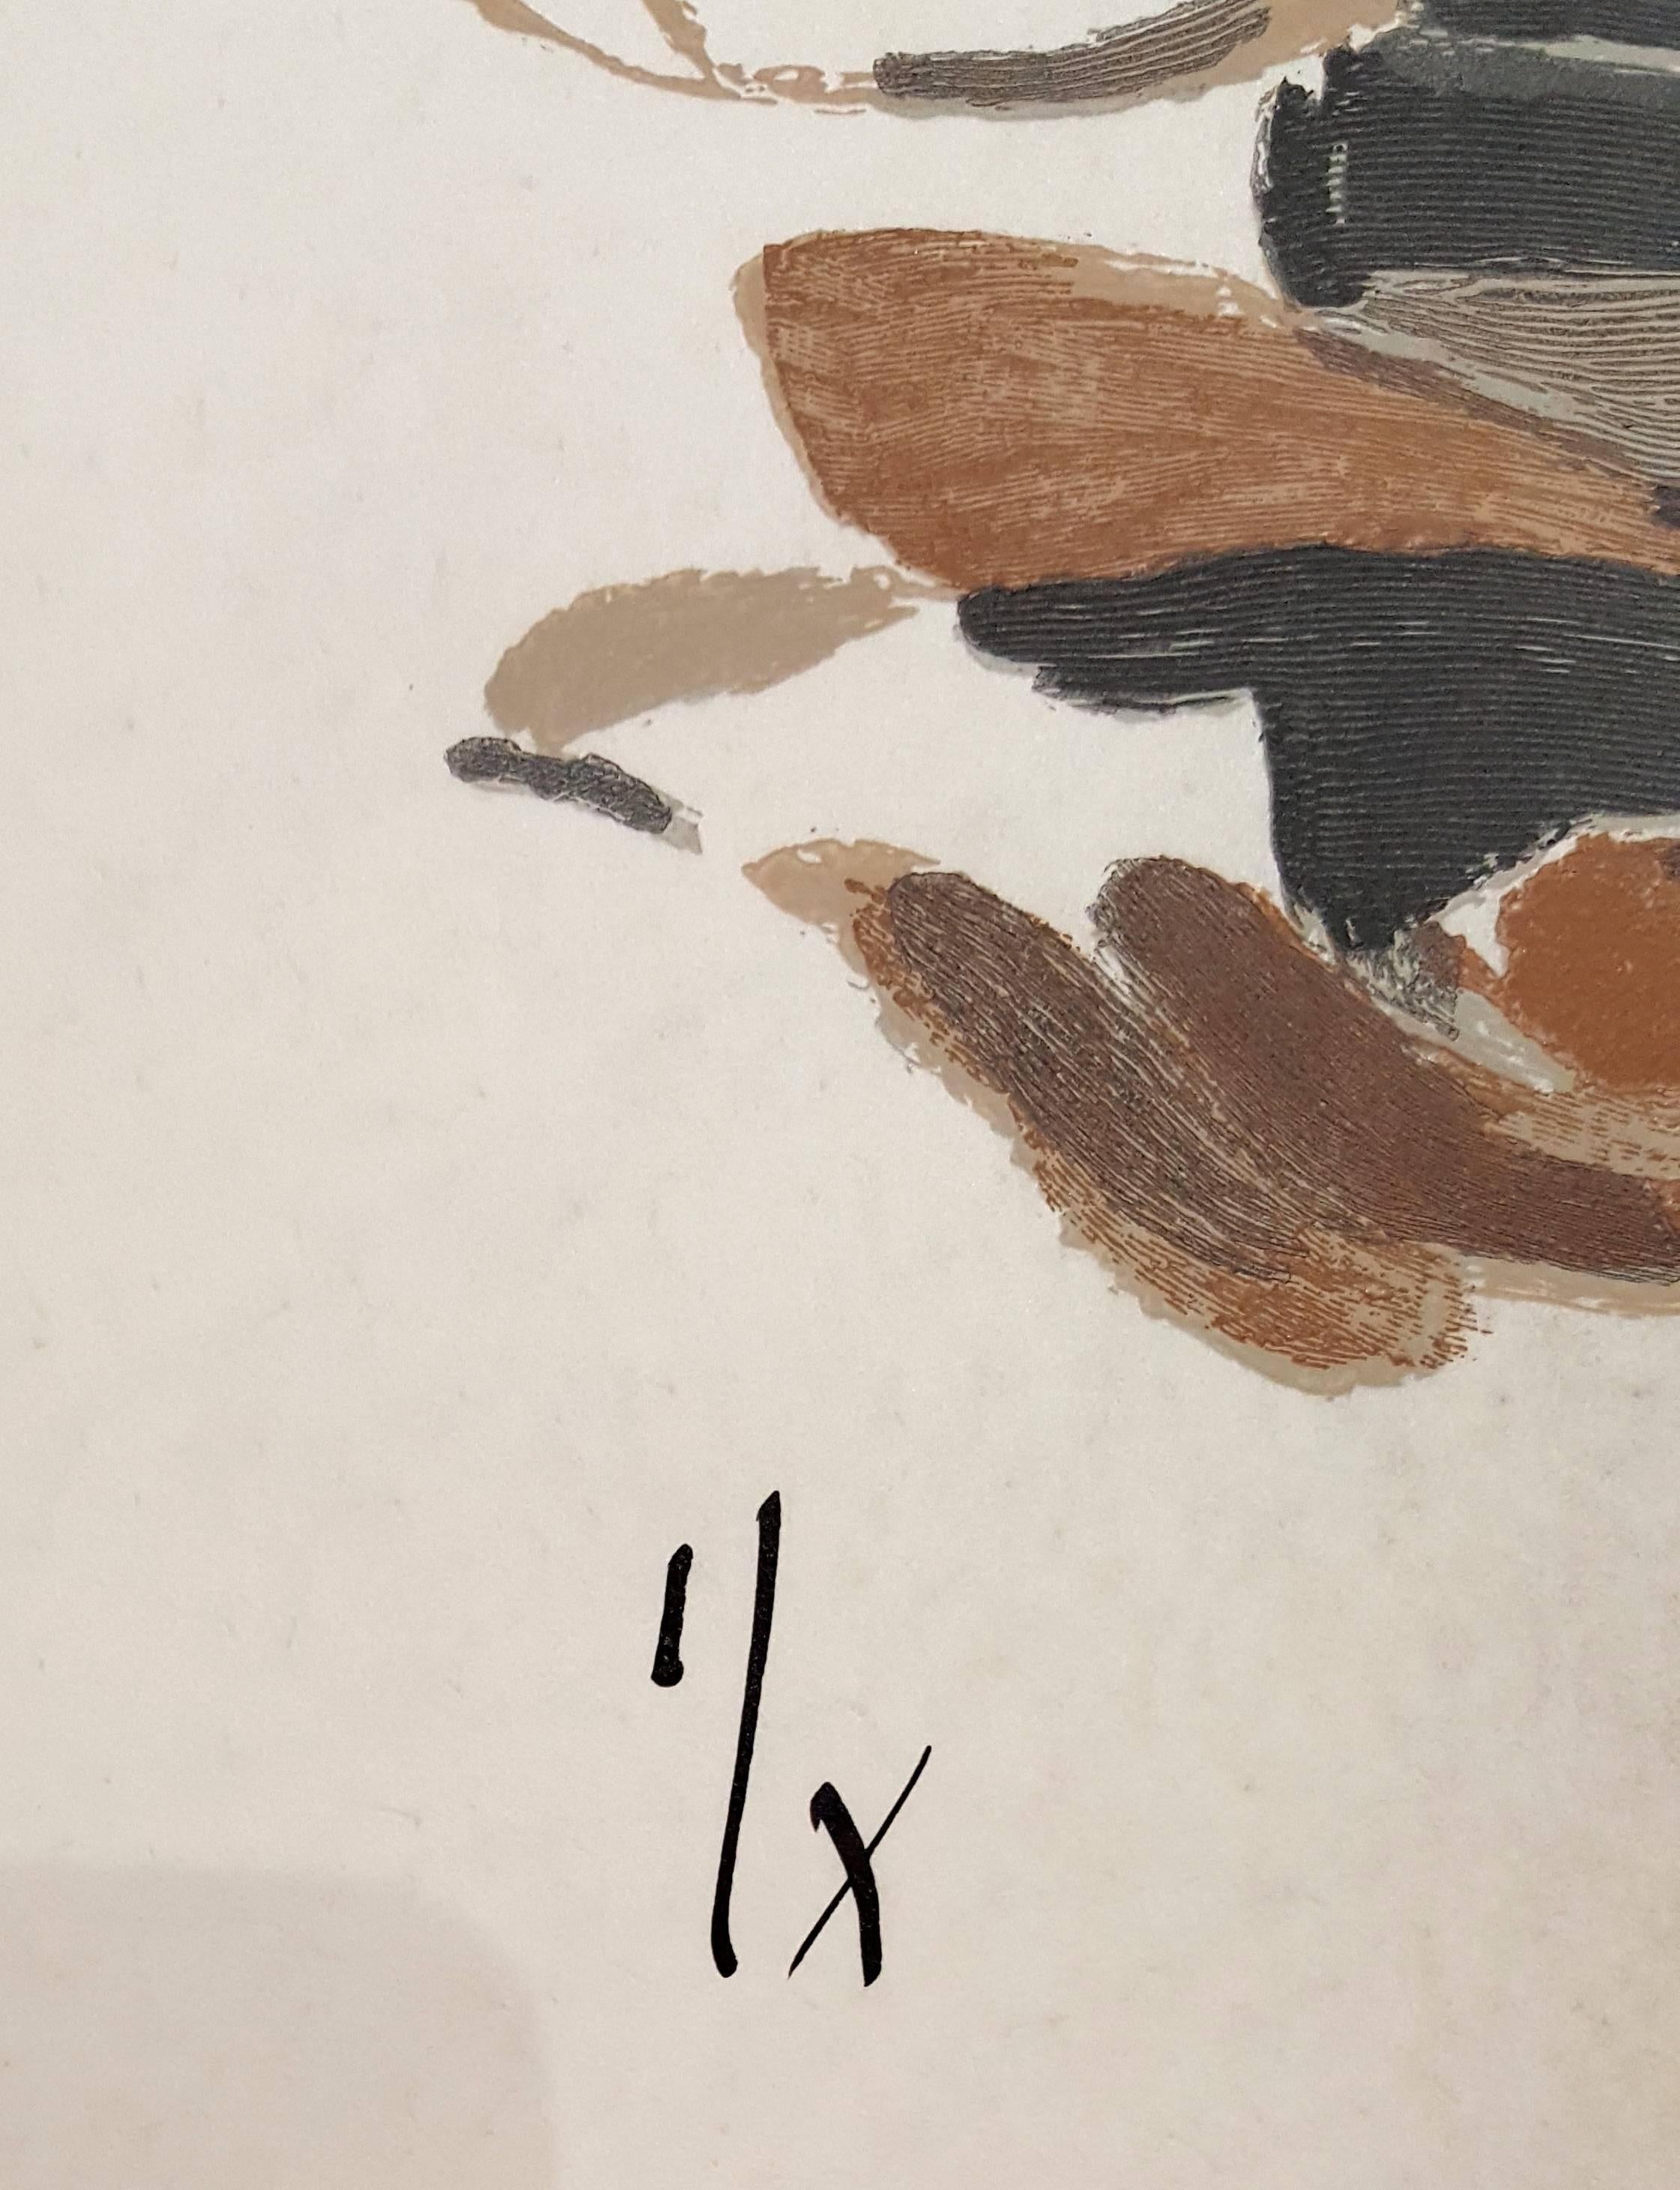 Georges BRAQUE
Composition, deluxe impression from the book "Si je mourais là-bas"

Original woodcut, 1962
Handsigned in ink
Numbered from the deluxe edition of 10 impressions (additional signed suite) in Roman numerals on Parchment